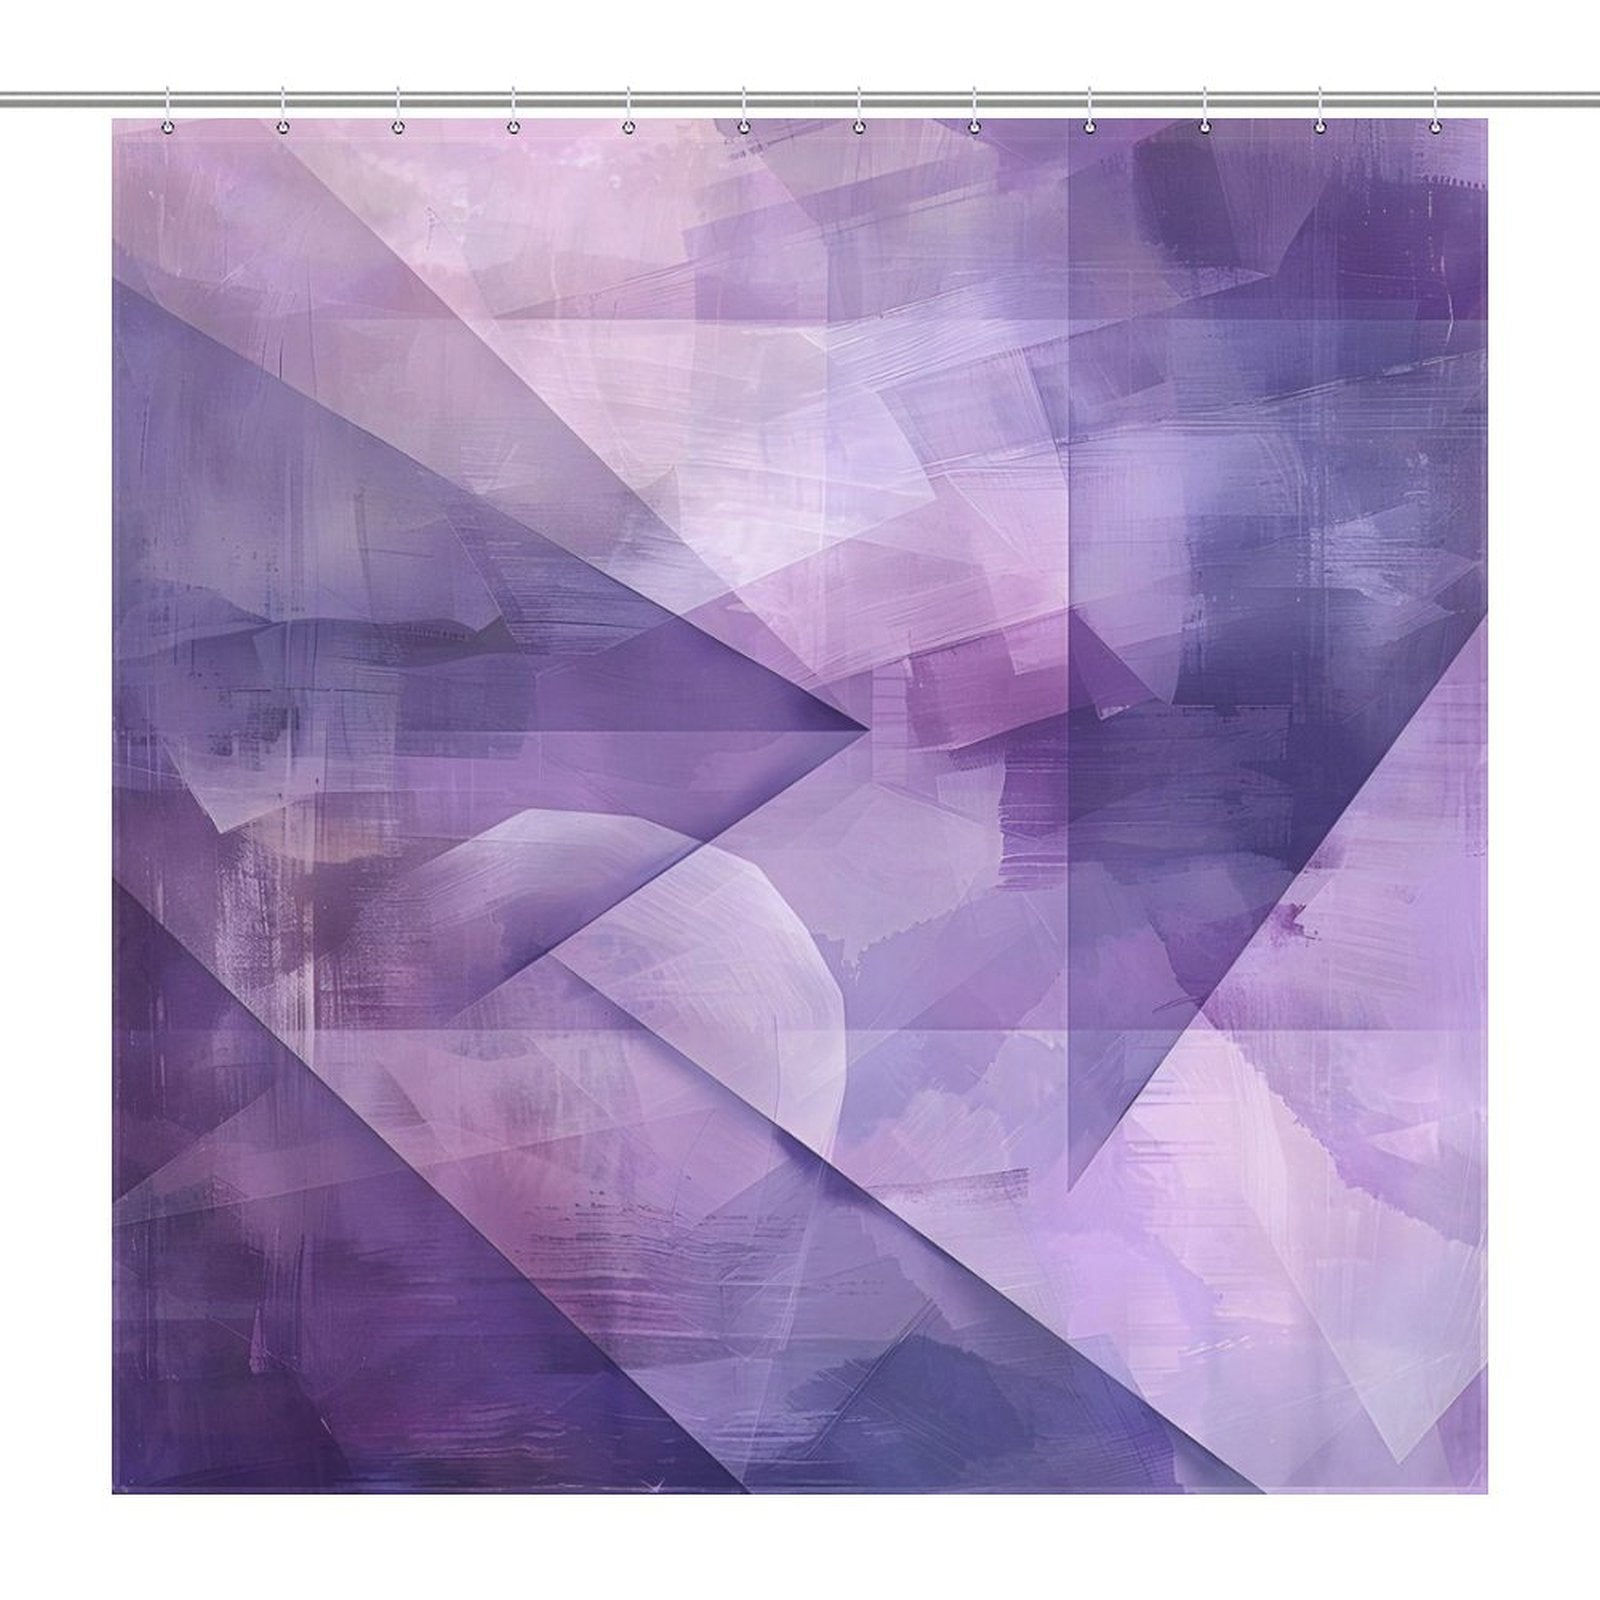 A Purple Abstract Modern Boho Geometric Art Minimalist Shower Curtain-Cottoncat by Cotton Cat featuring an abstract design in shades of purple, combining geometric shapes and gradients for a layered, textured appearance that adds a touch of minimalist bathroom decor.